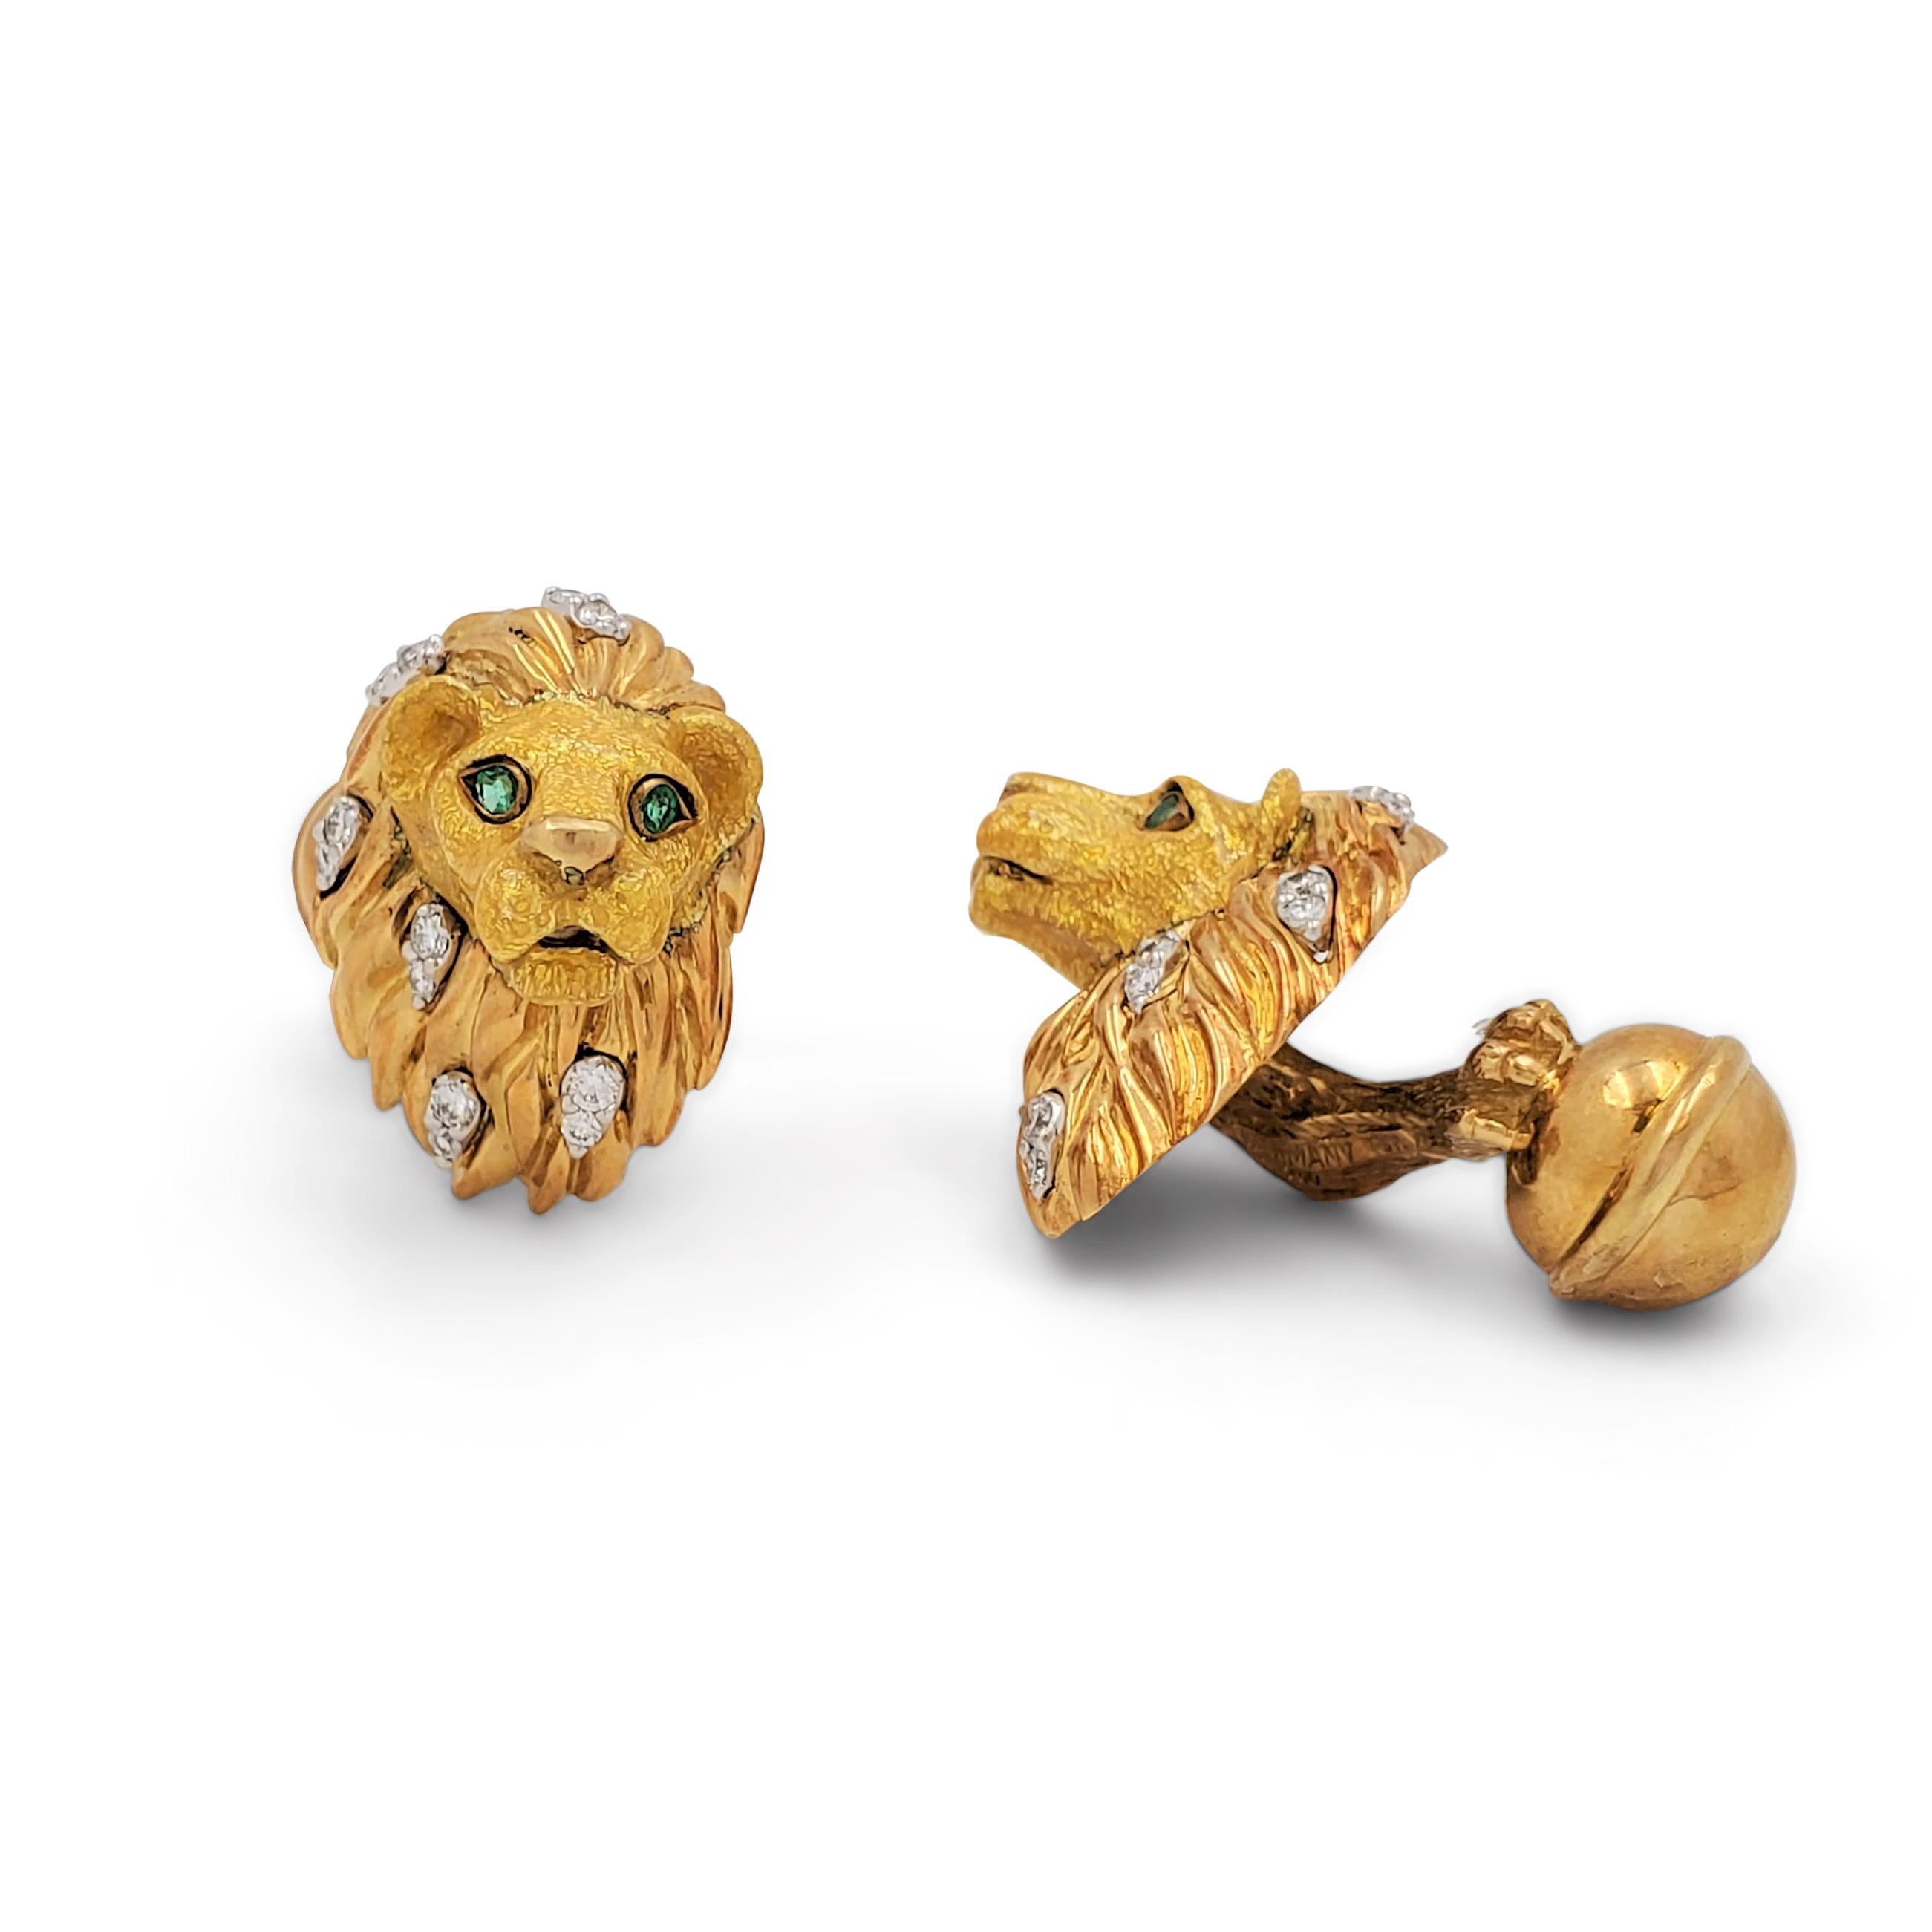 Authentic Tiffany & Co. cufflinks crafted in 18 karats Yellow Gold and Emerald. Designed in the shape of a lion's head, the majestic mane of each lion is set with 12 round brilliant cut diamonds, weighing an estimated 0.96 carats, total. The eyes